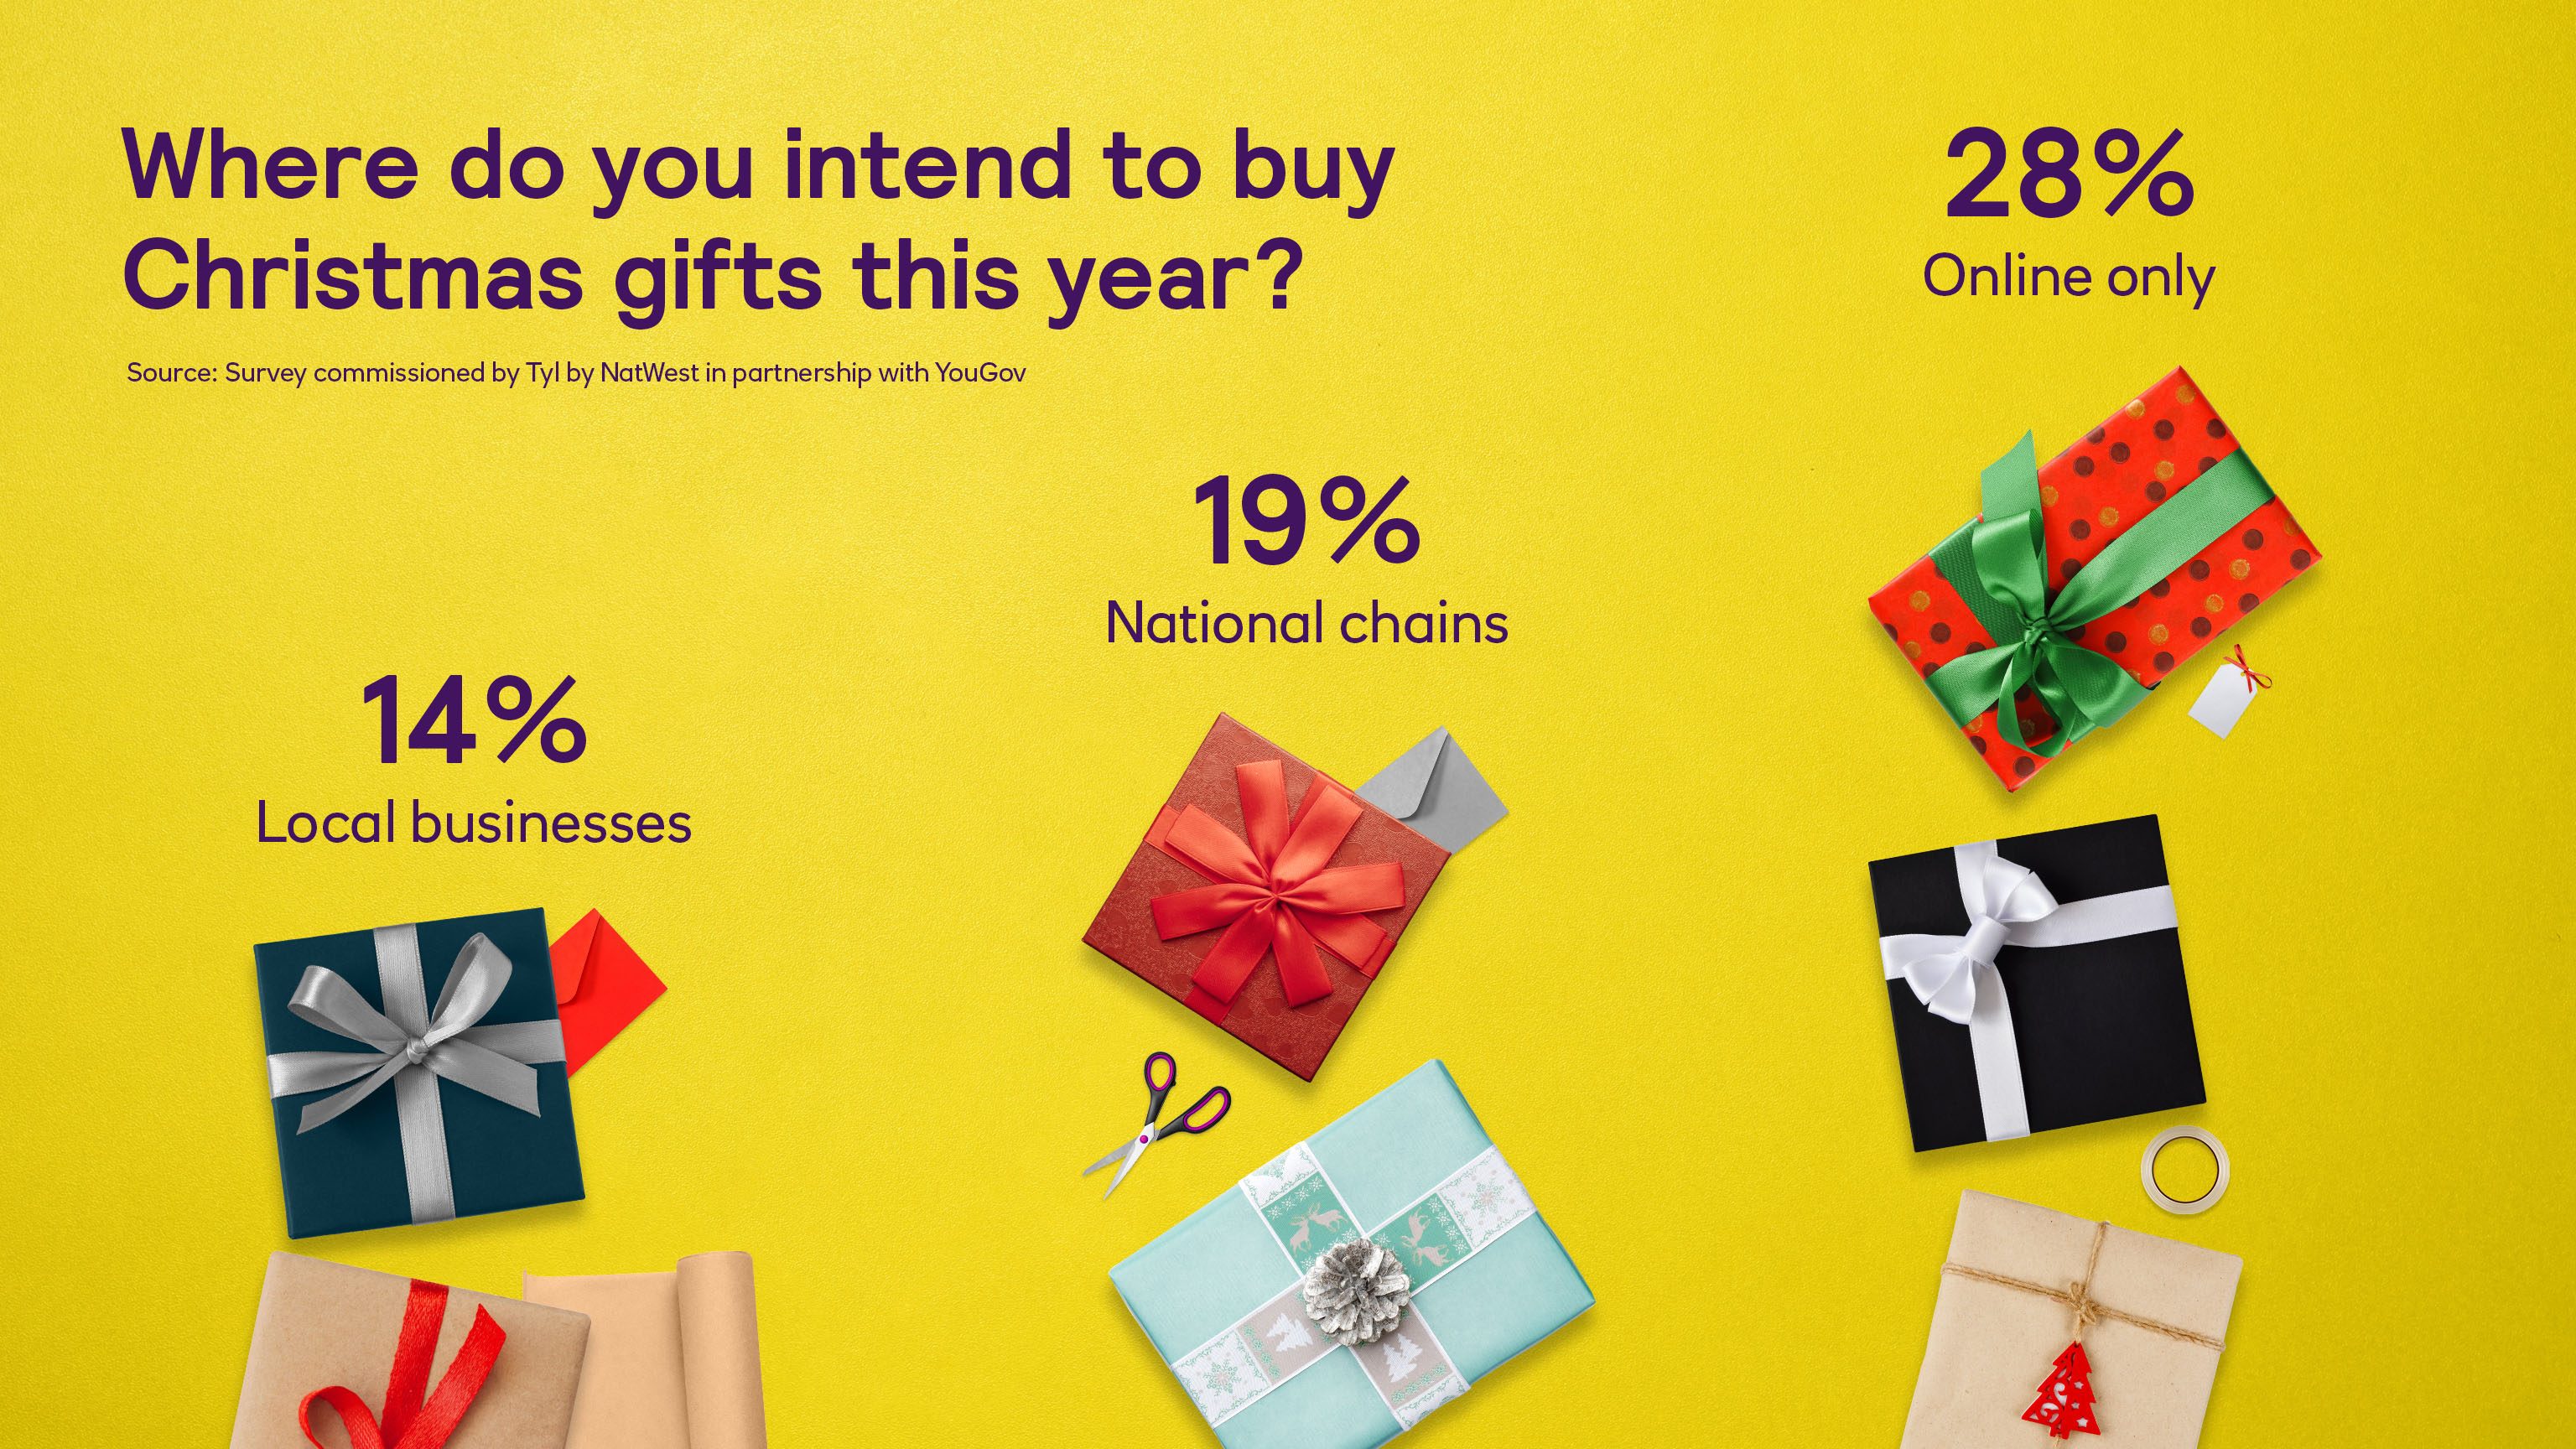 Where do you intend to buy Christmas gifts this year?